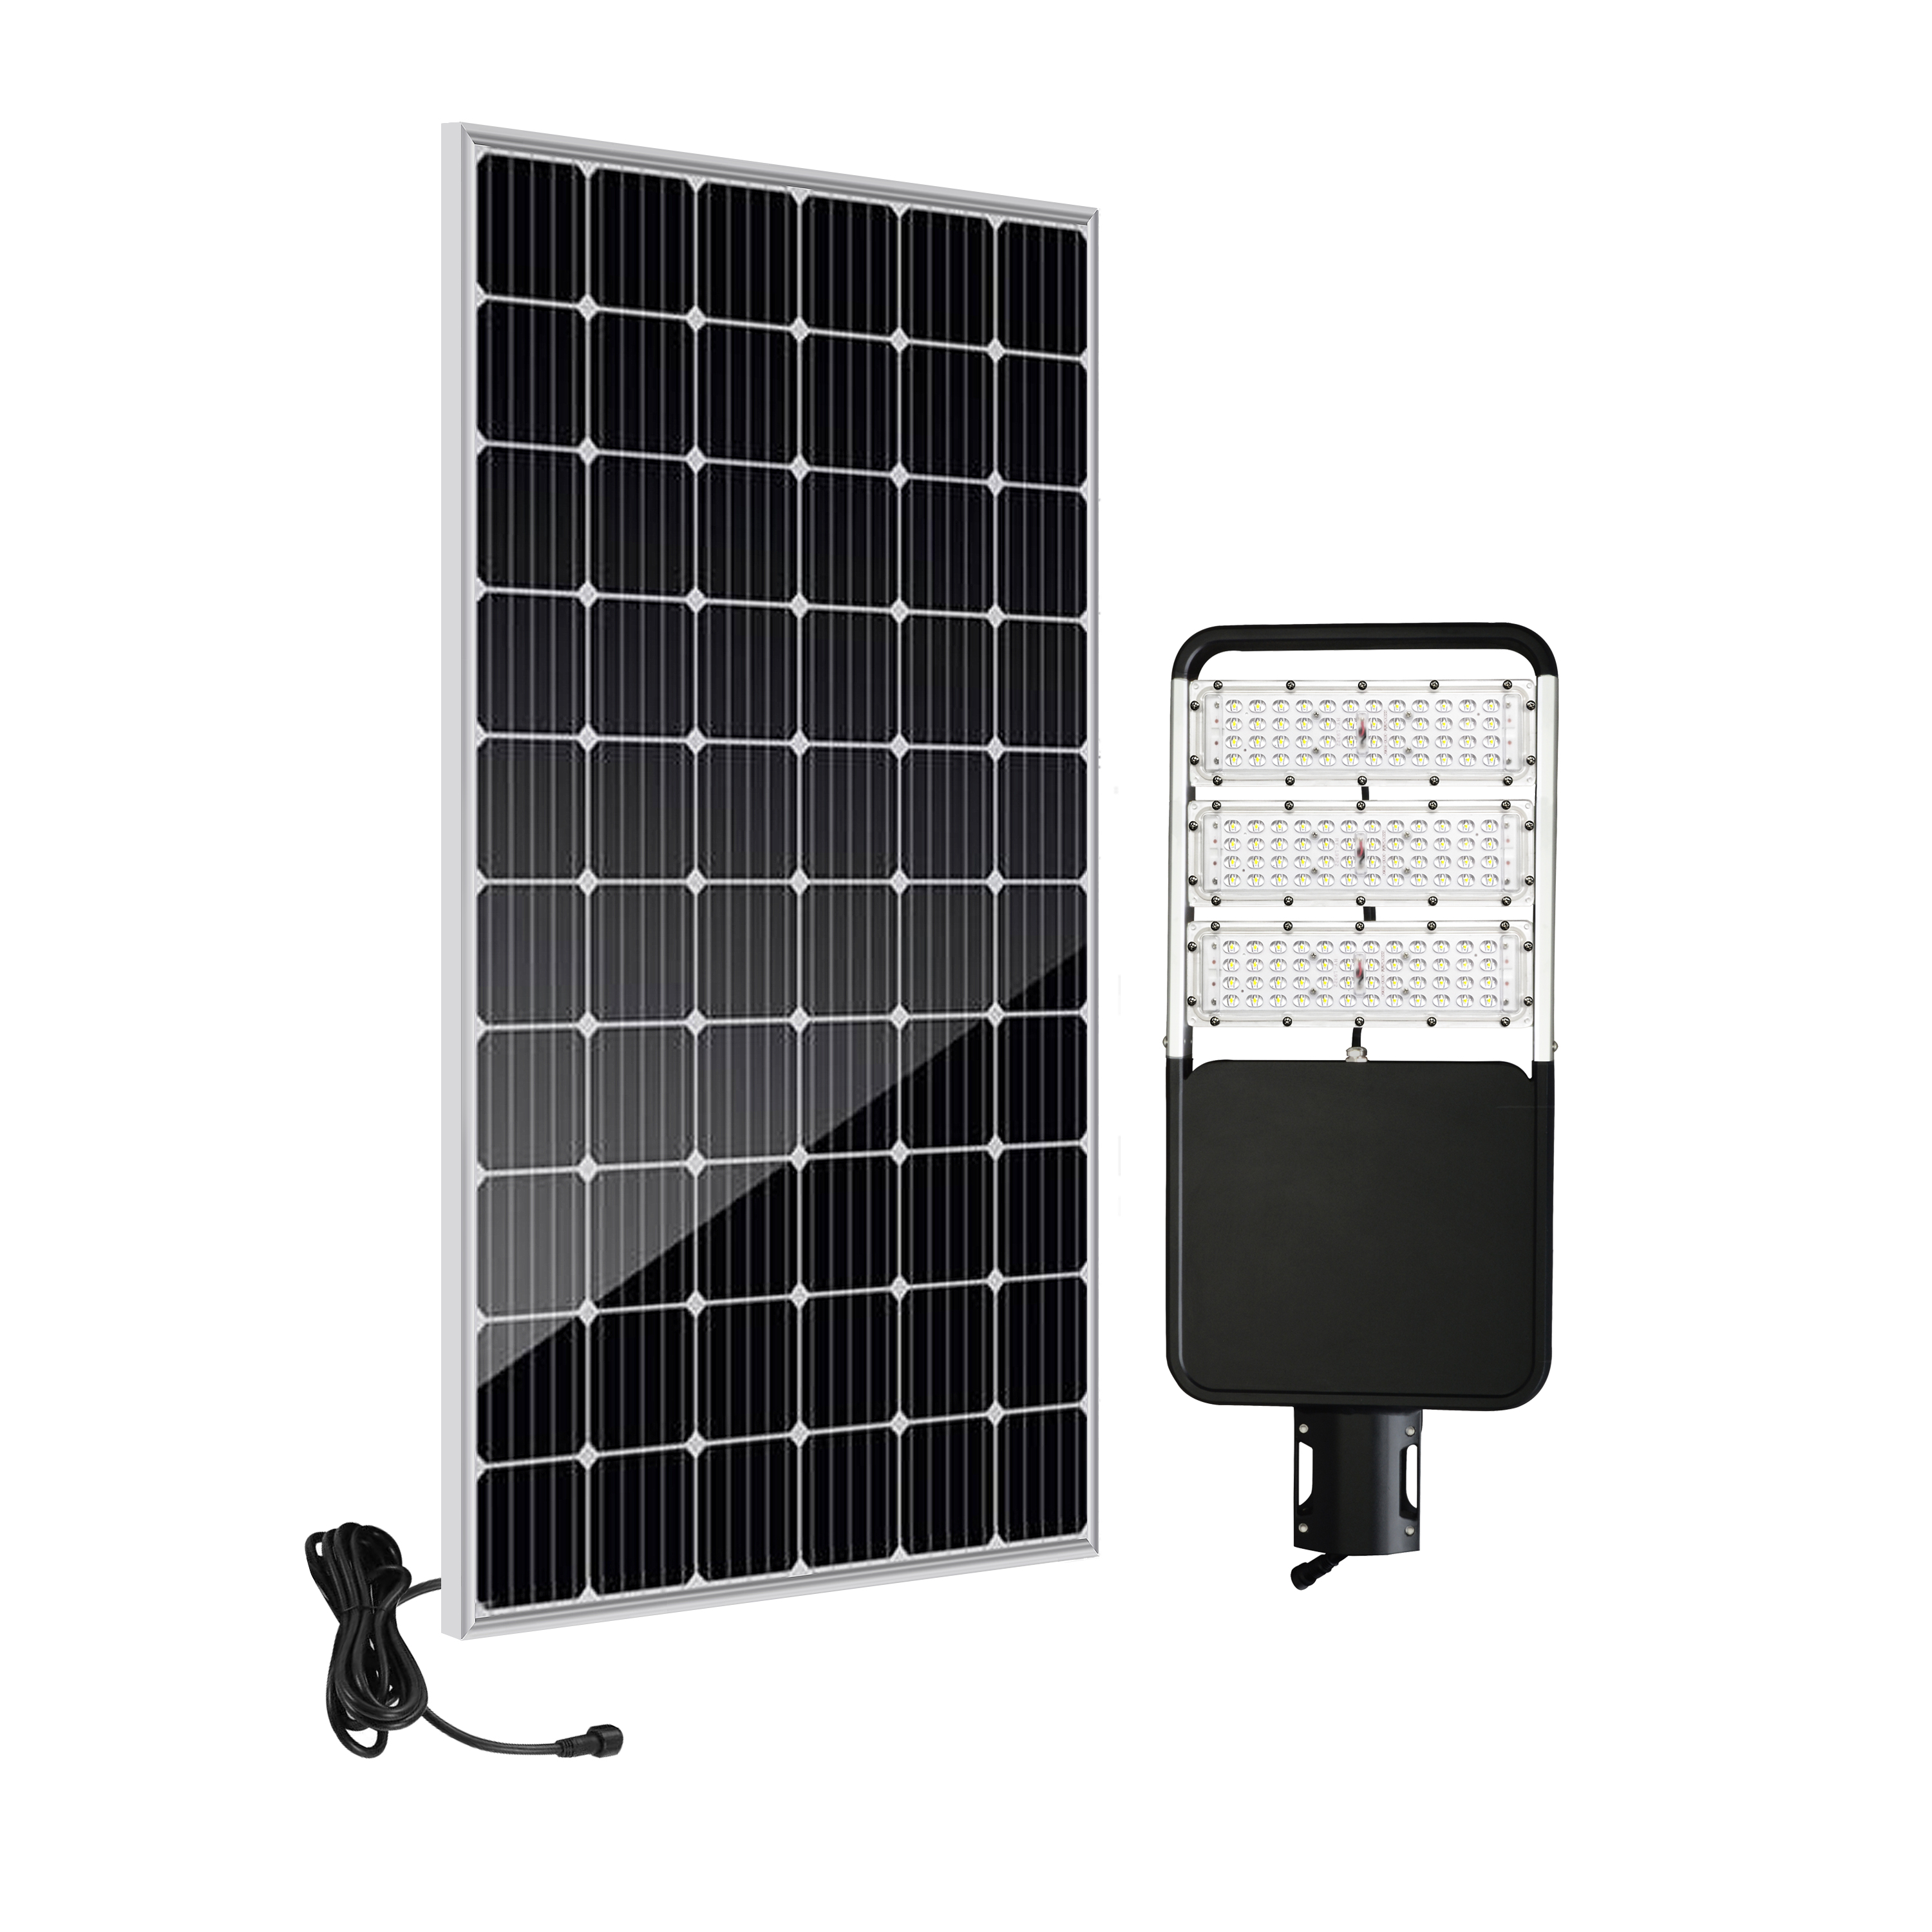 50W New Generation Integrated All in One Solar Street LED Street Light with IEC/TUV/RoHS/CE Certificate with Remote Control